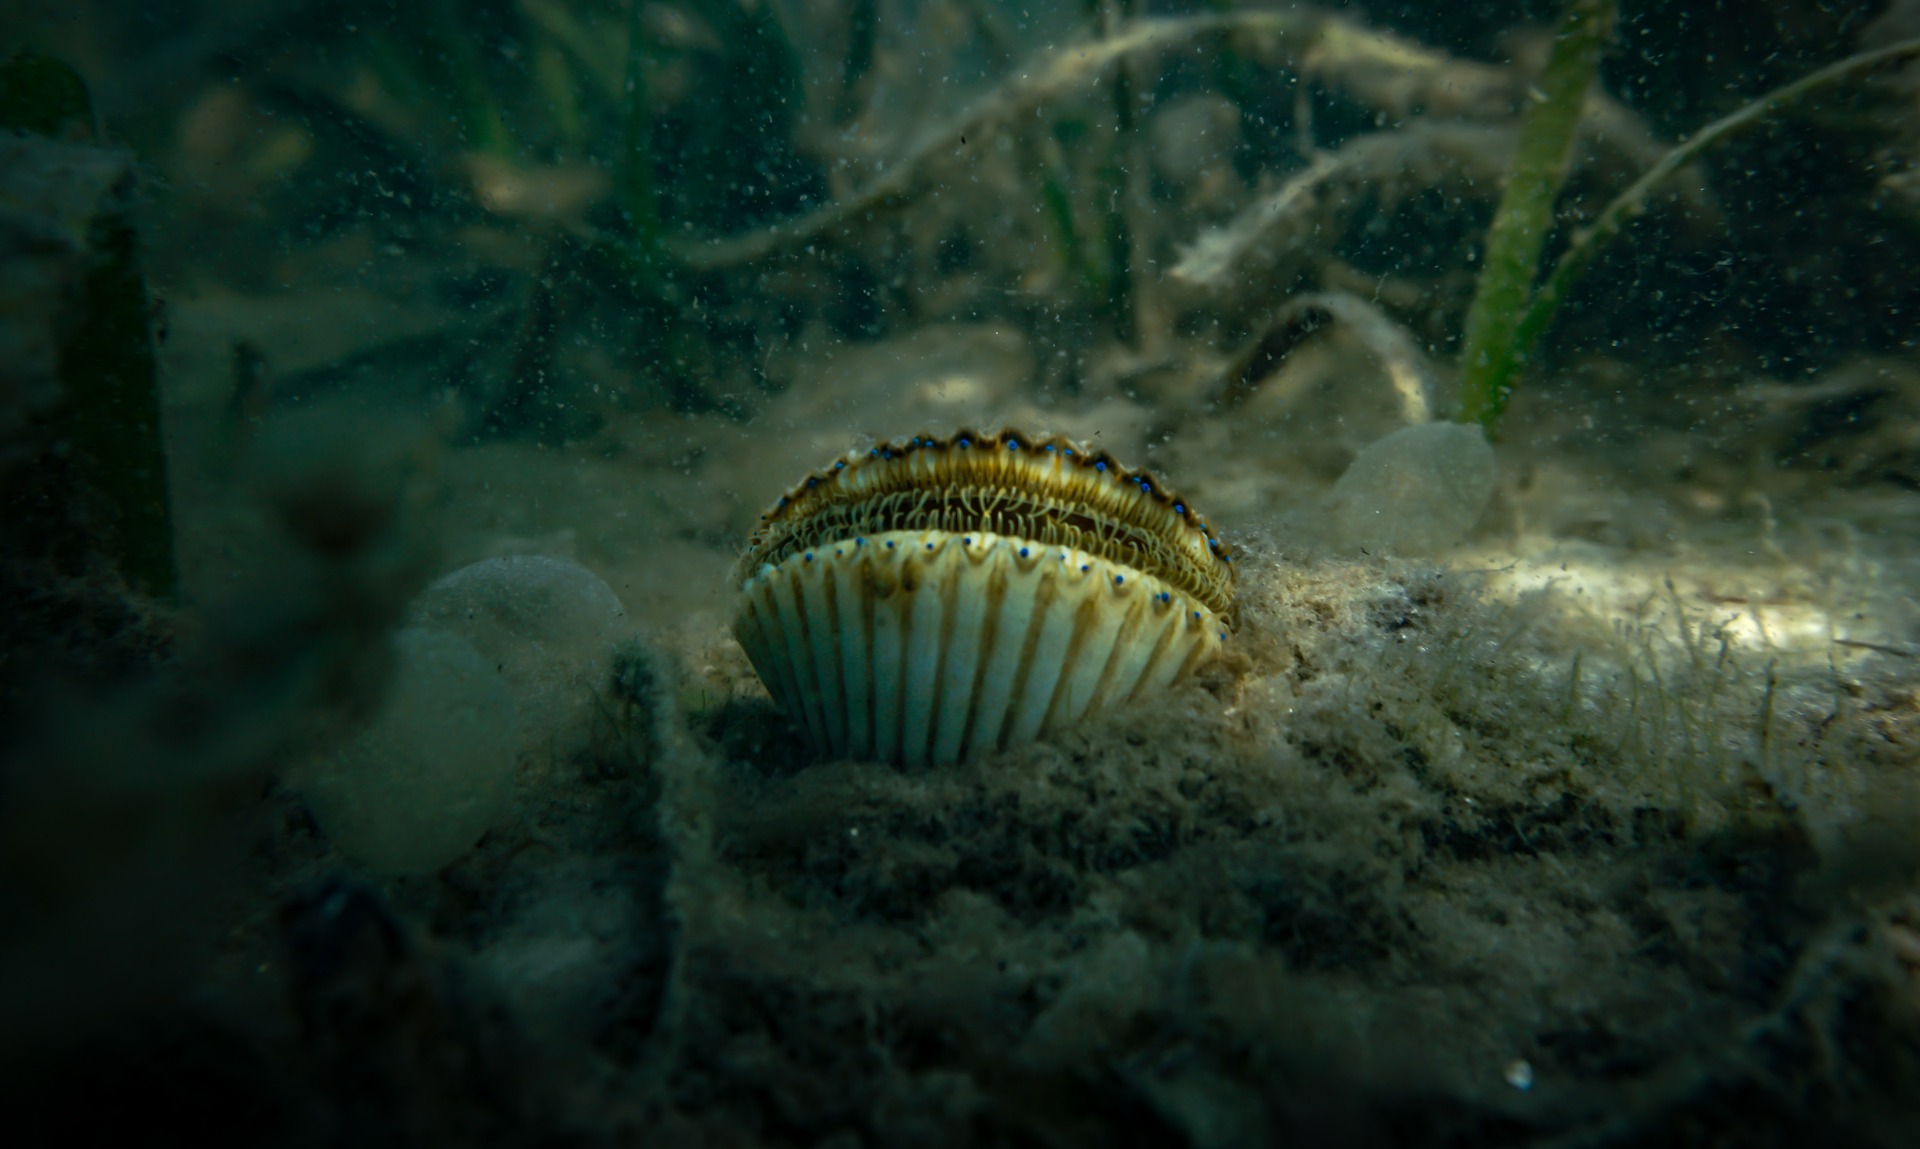 Bay scallop in the water